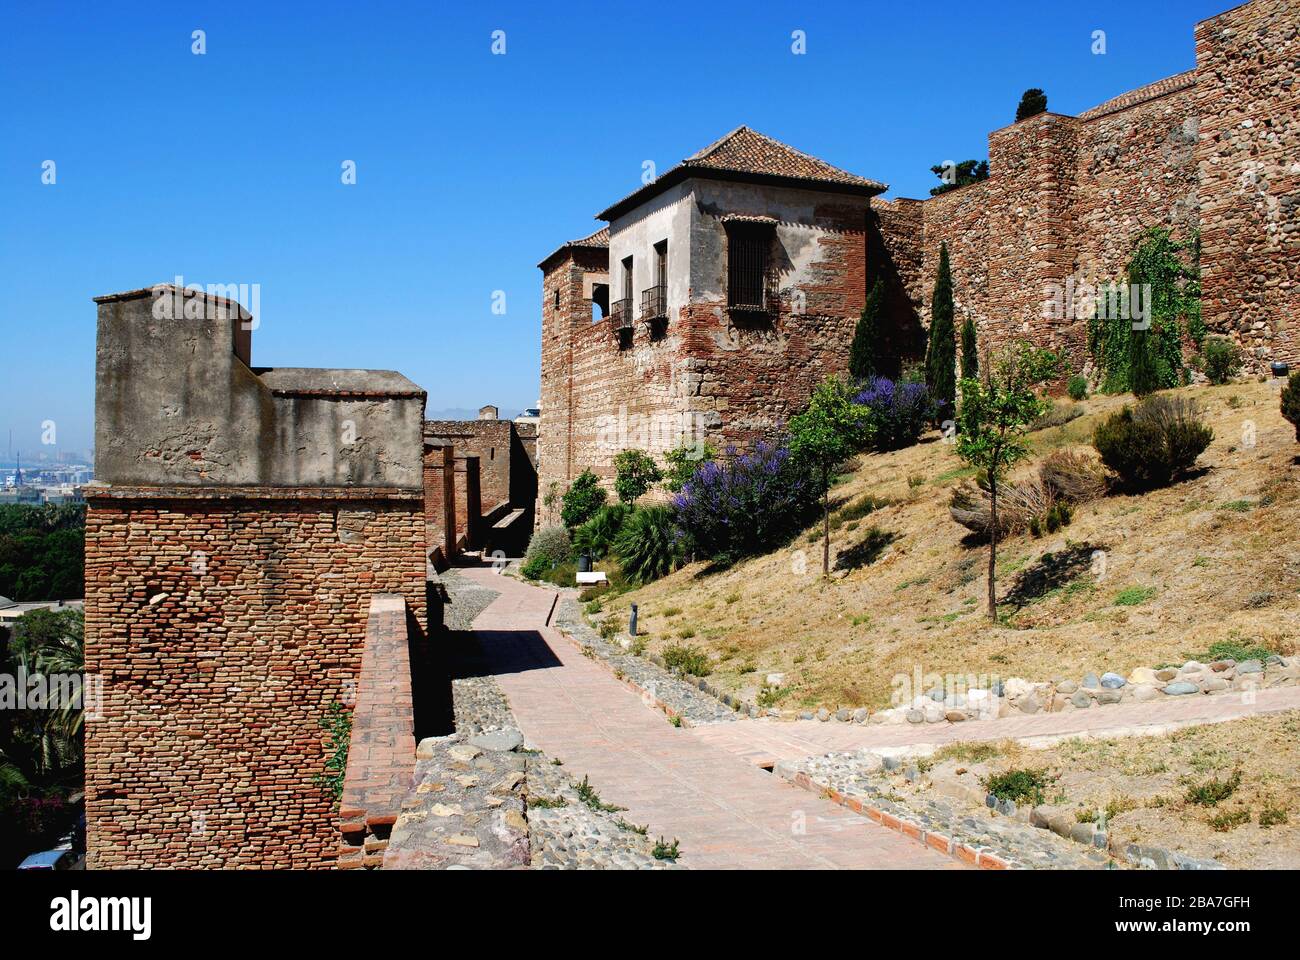 Upper walled precinct of the citadel viewed from the South at Malaga castle, Malaga, Malaga Province, Andalucia, Spain. Stock Photo